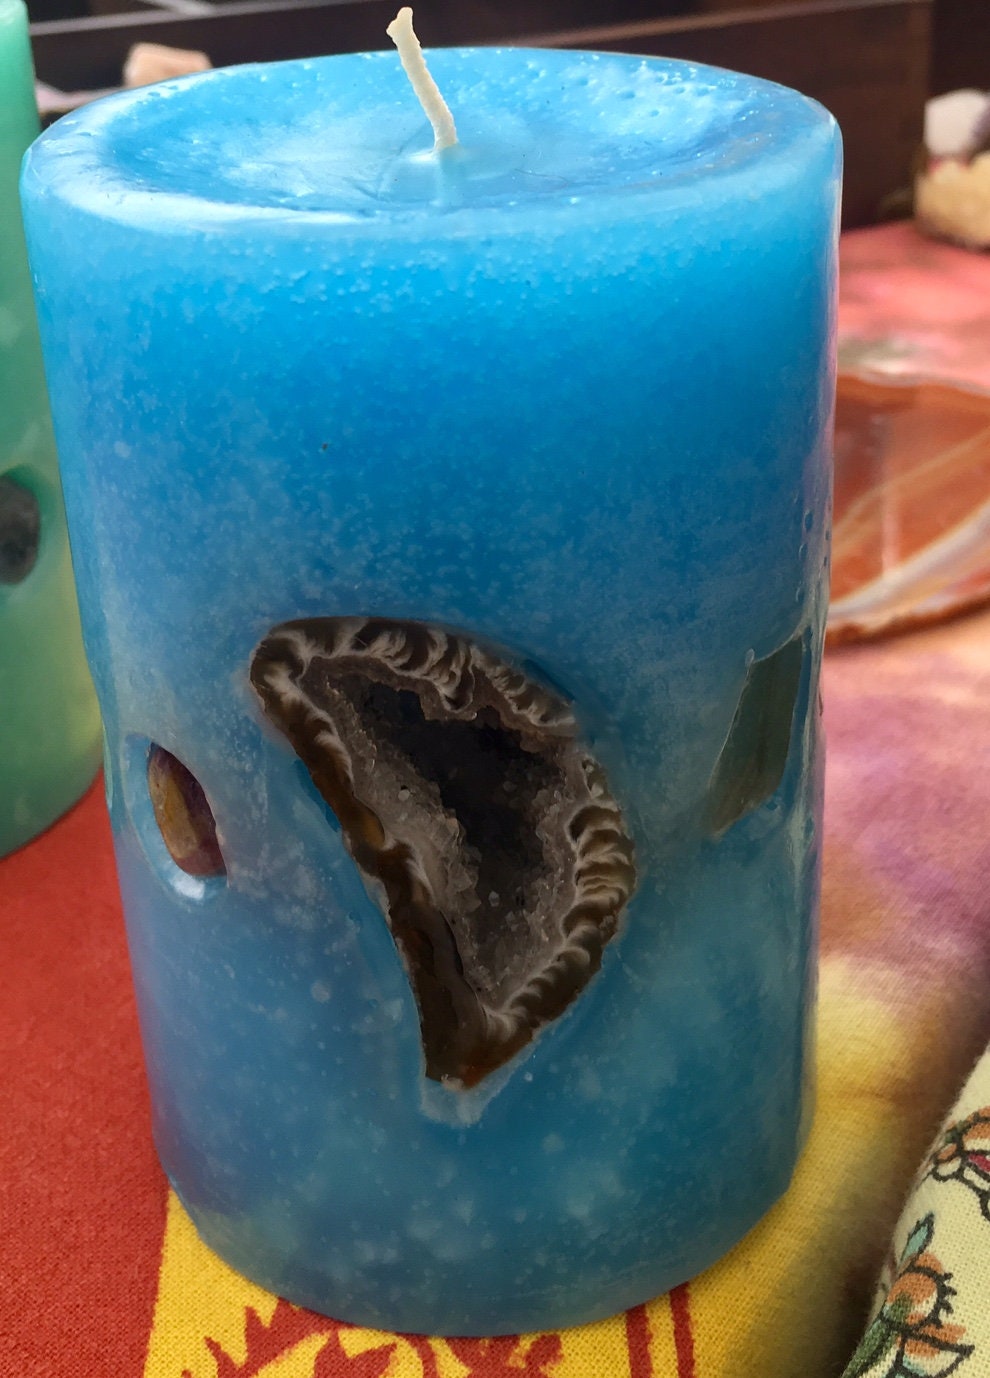 Crystal Candle ~ Small Round Scented Candle inlaid with Crystals